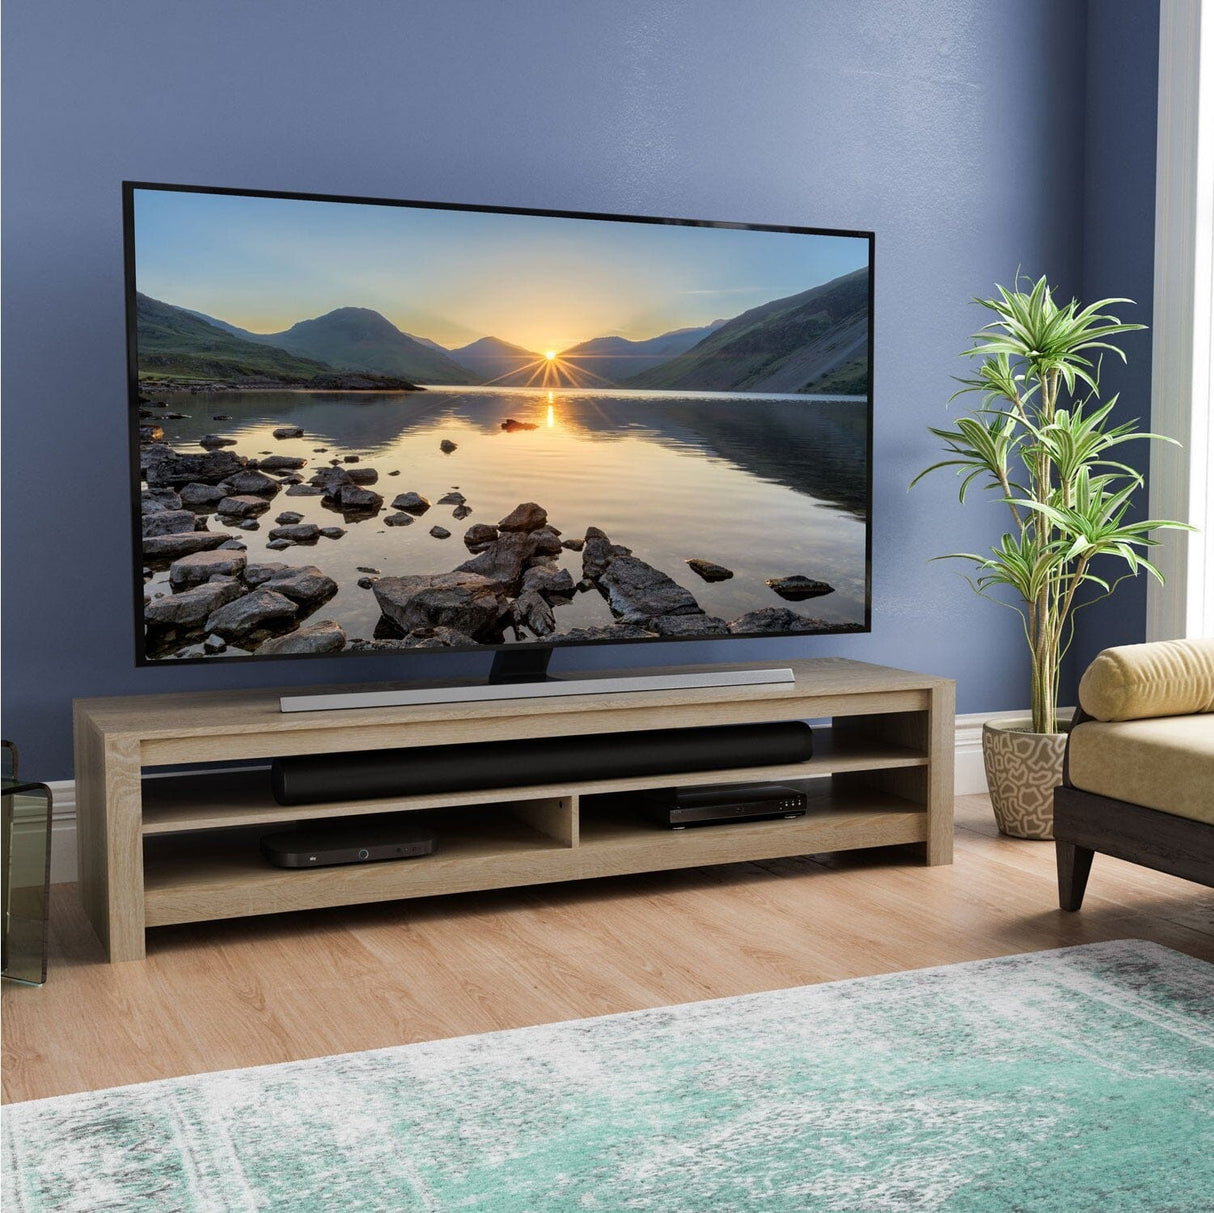 Techlink CA180RGO Calibre Flat TV Stand in Rustic Oak suits Up To 85" TVs